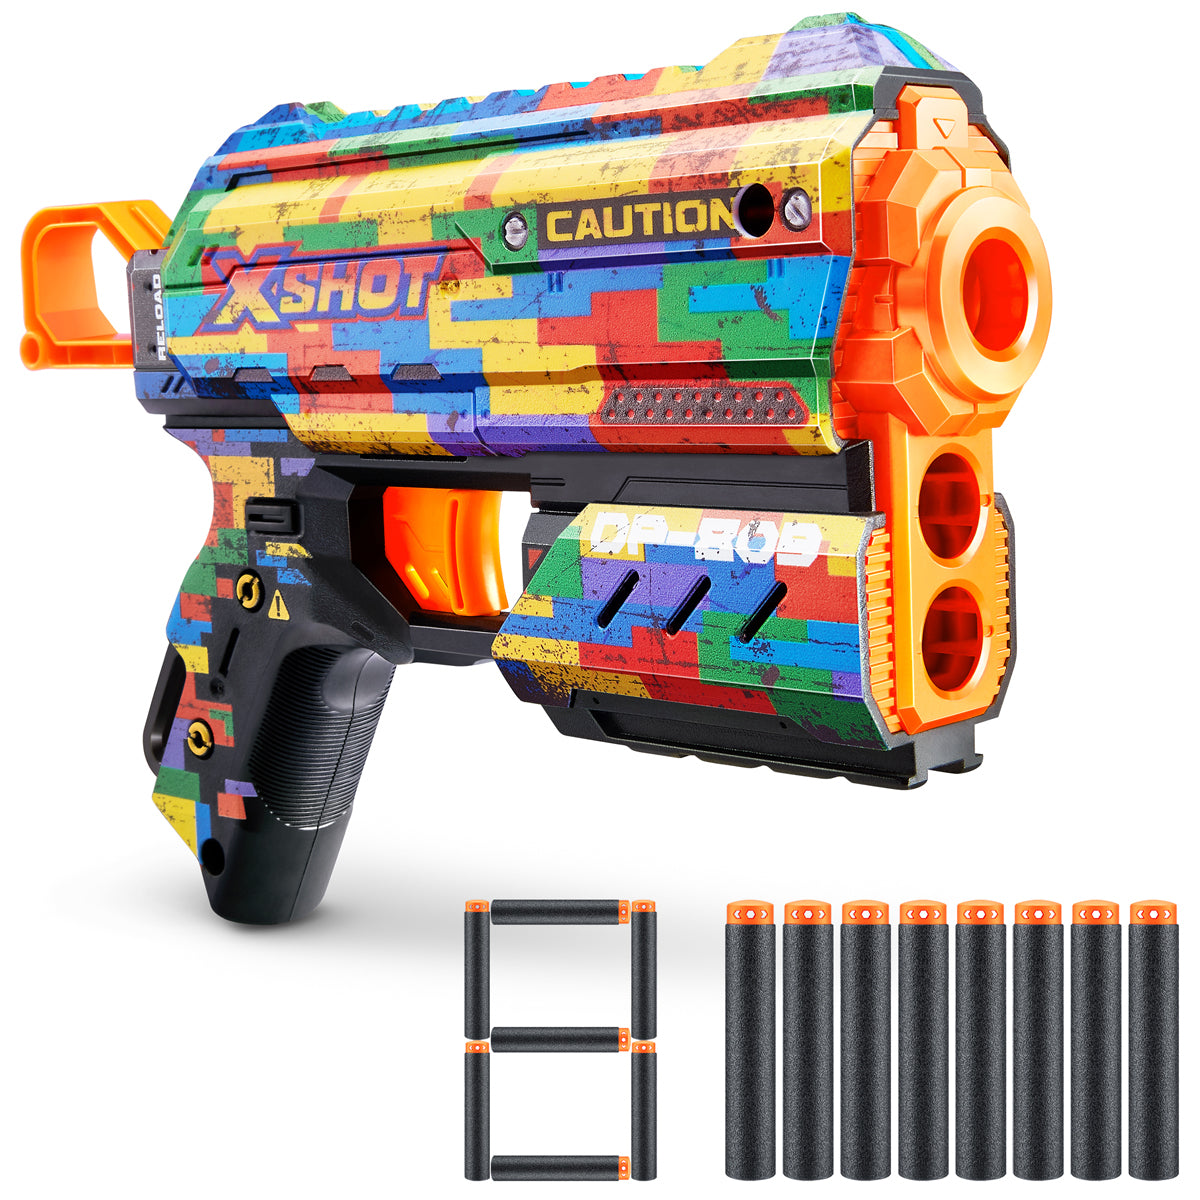 X-Shot Skins  Flux  Blaster with 8 Darts by ZURU (Colours Vary)